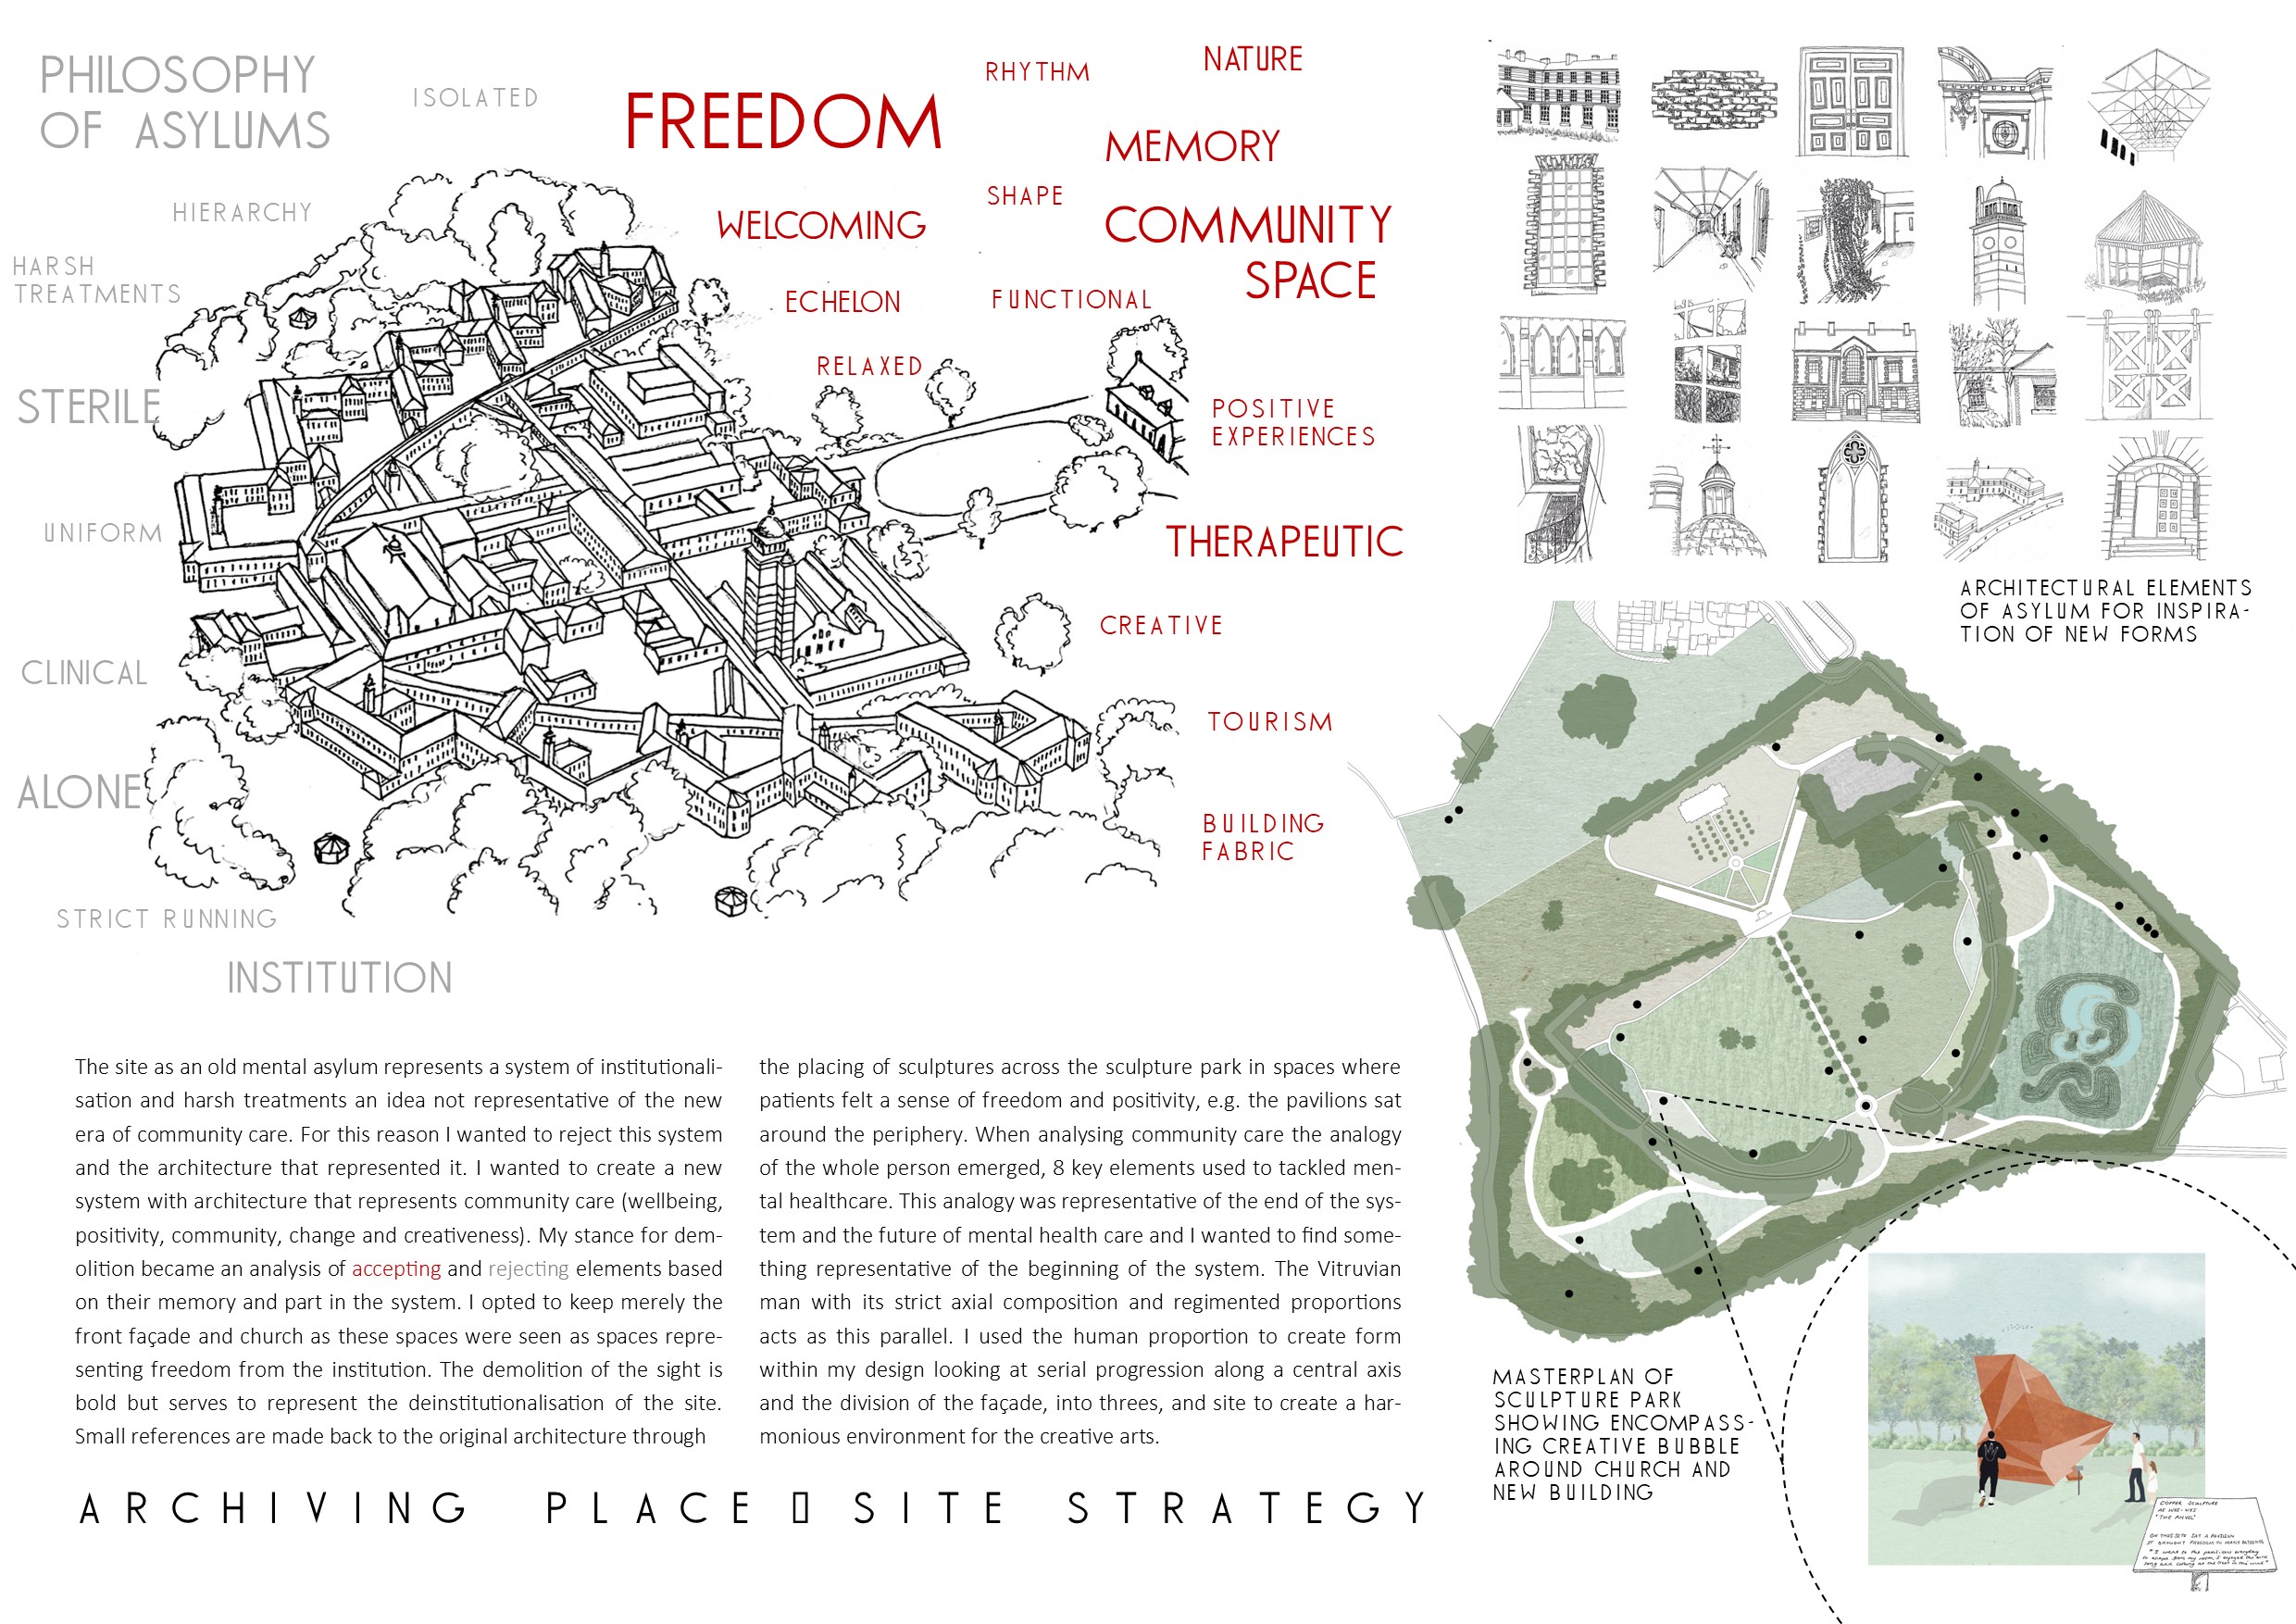 Portfolio Page of the site strategy, a 3d hand drawing showing what the proposal accepts and rejects  based on memory and their part in the system. Sketches show architectural elements of the asylum for inspiration of new forms and a masterplan shows the proposed sculpture parks and the new proposed building.